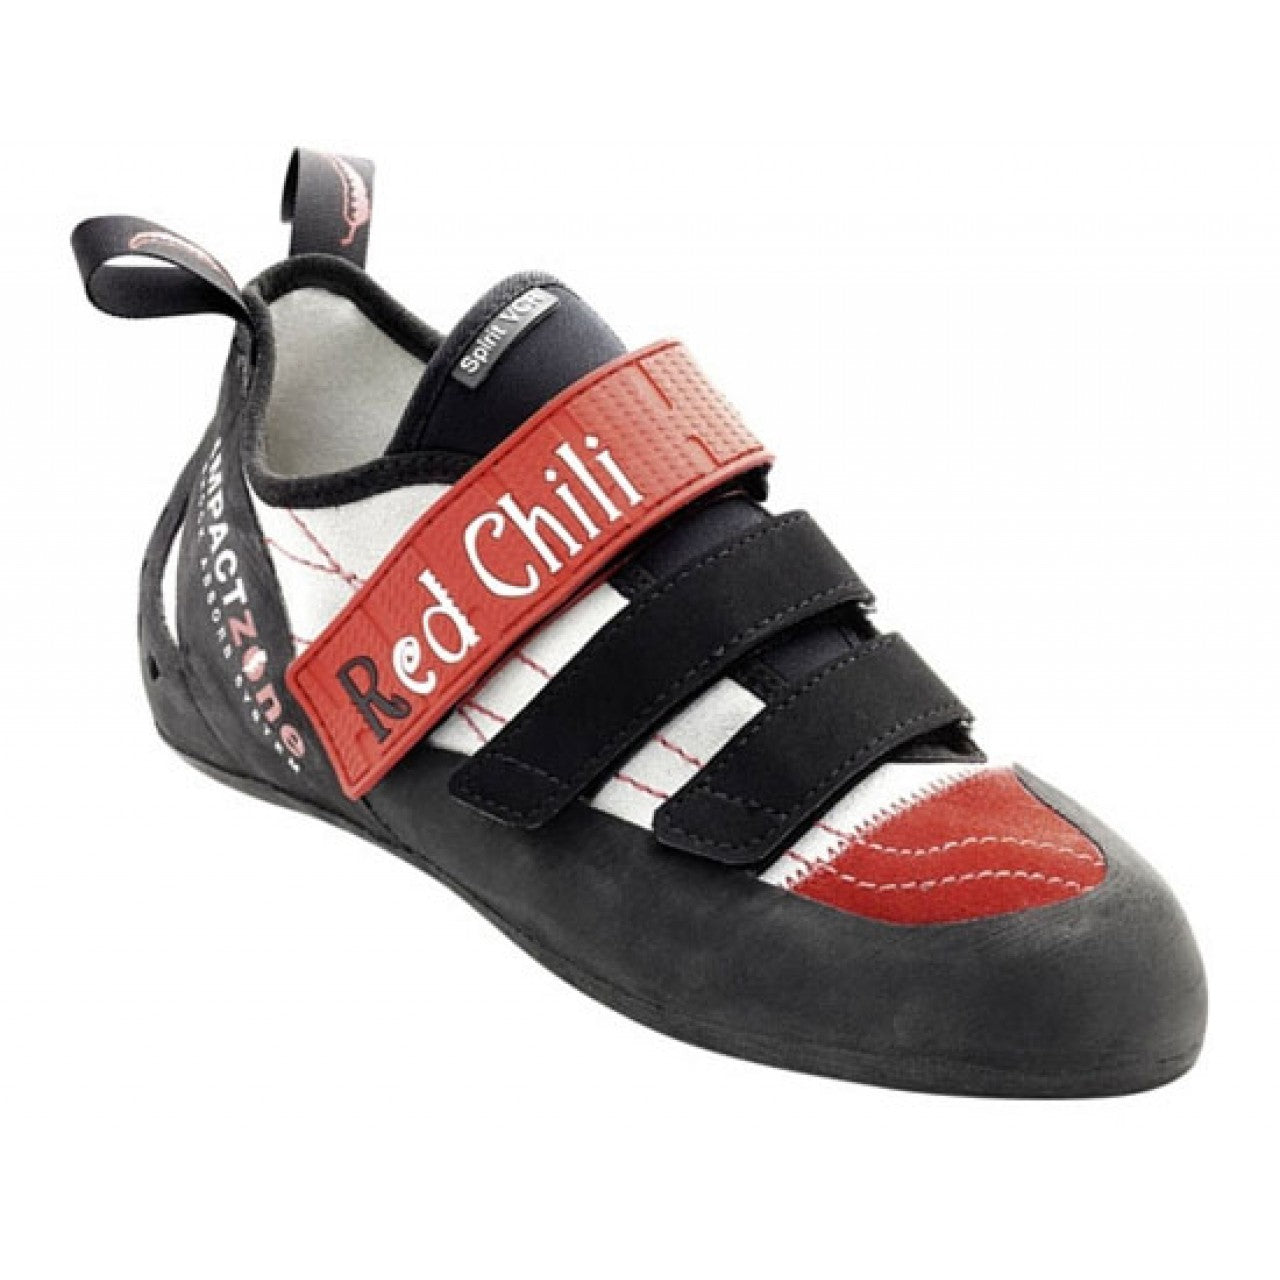 red chili climbing shoes sizing